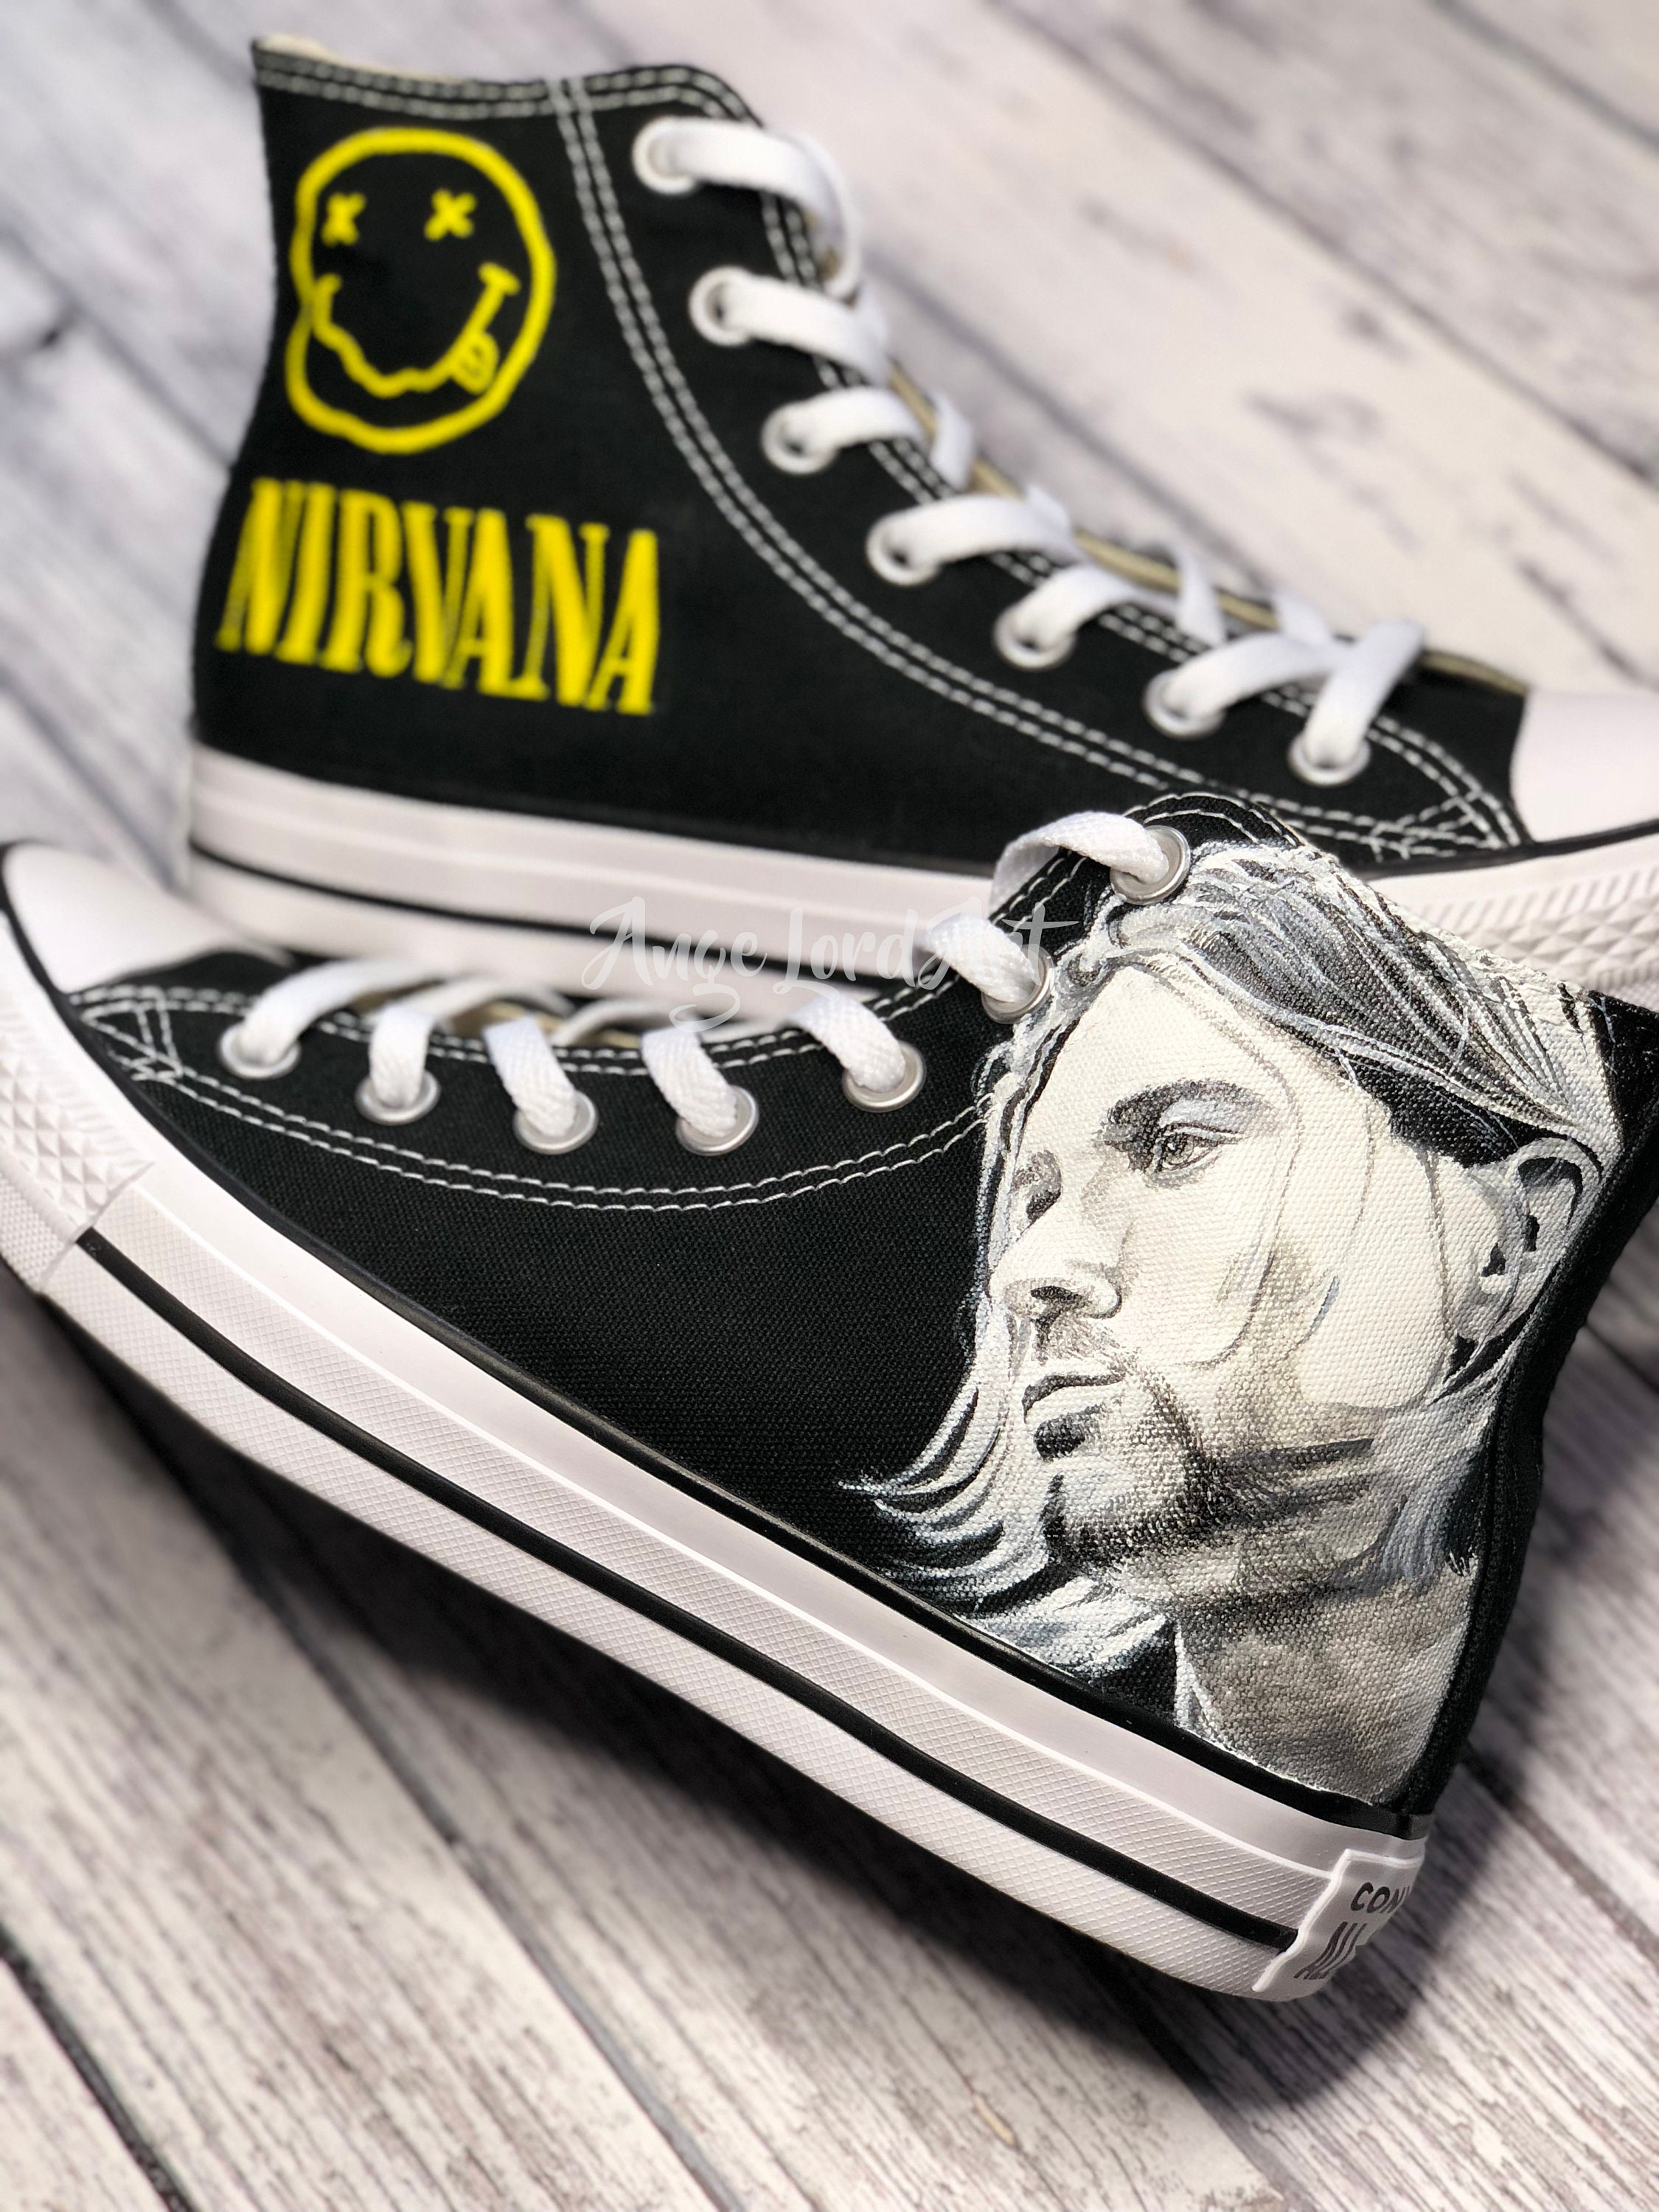 Converse Shoes Hand Painted 1990's Rock Graphic Nirvana 